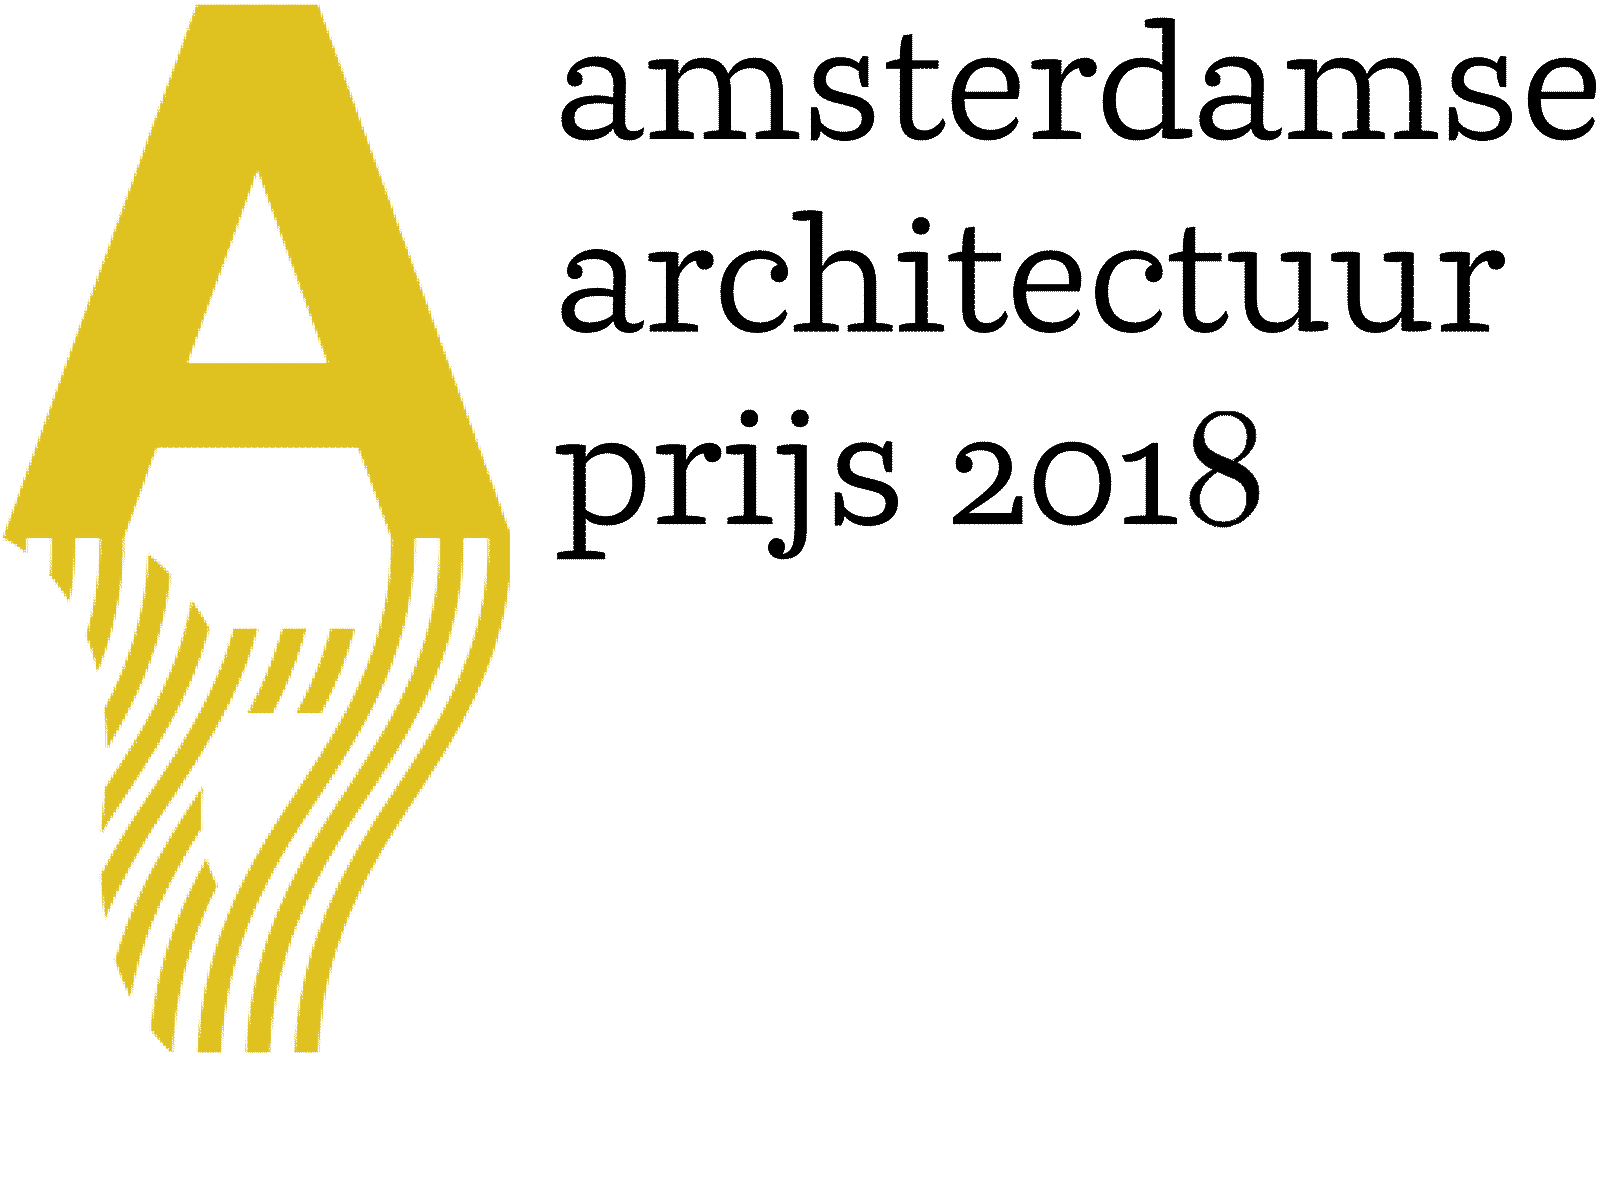 Ru Paré Community nominated for the Amsterdam Architecture Prize